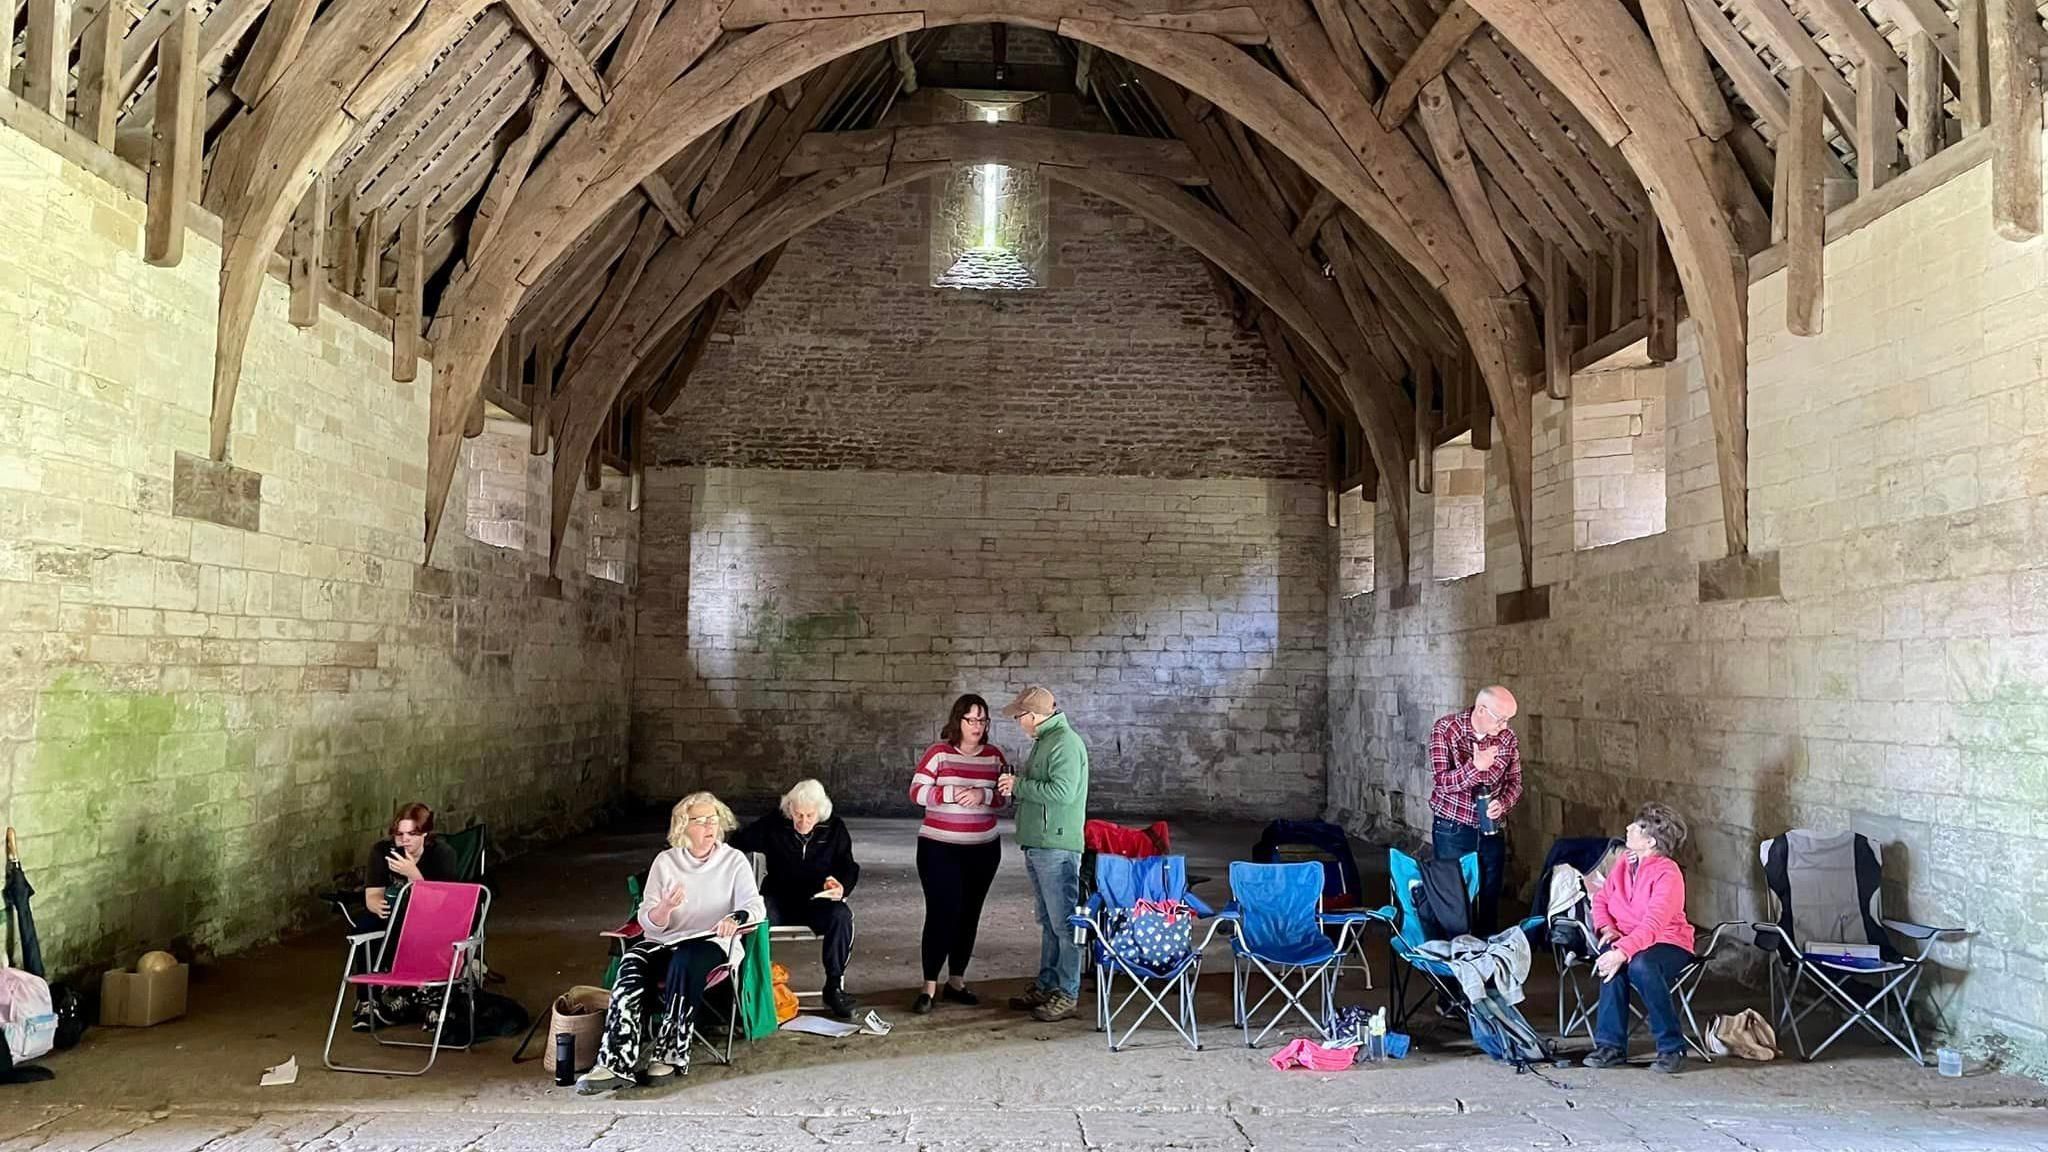 The Bradfordians Dramatic Society standing in the Tithe Barn. There are high arched wooden beam ceilings and stone slabs on the floor.